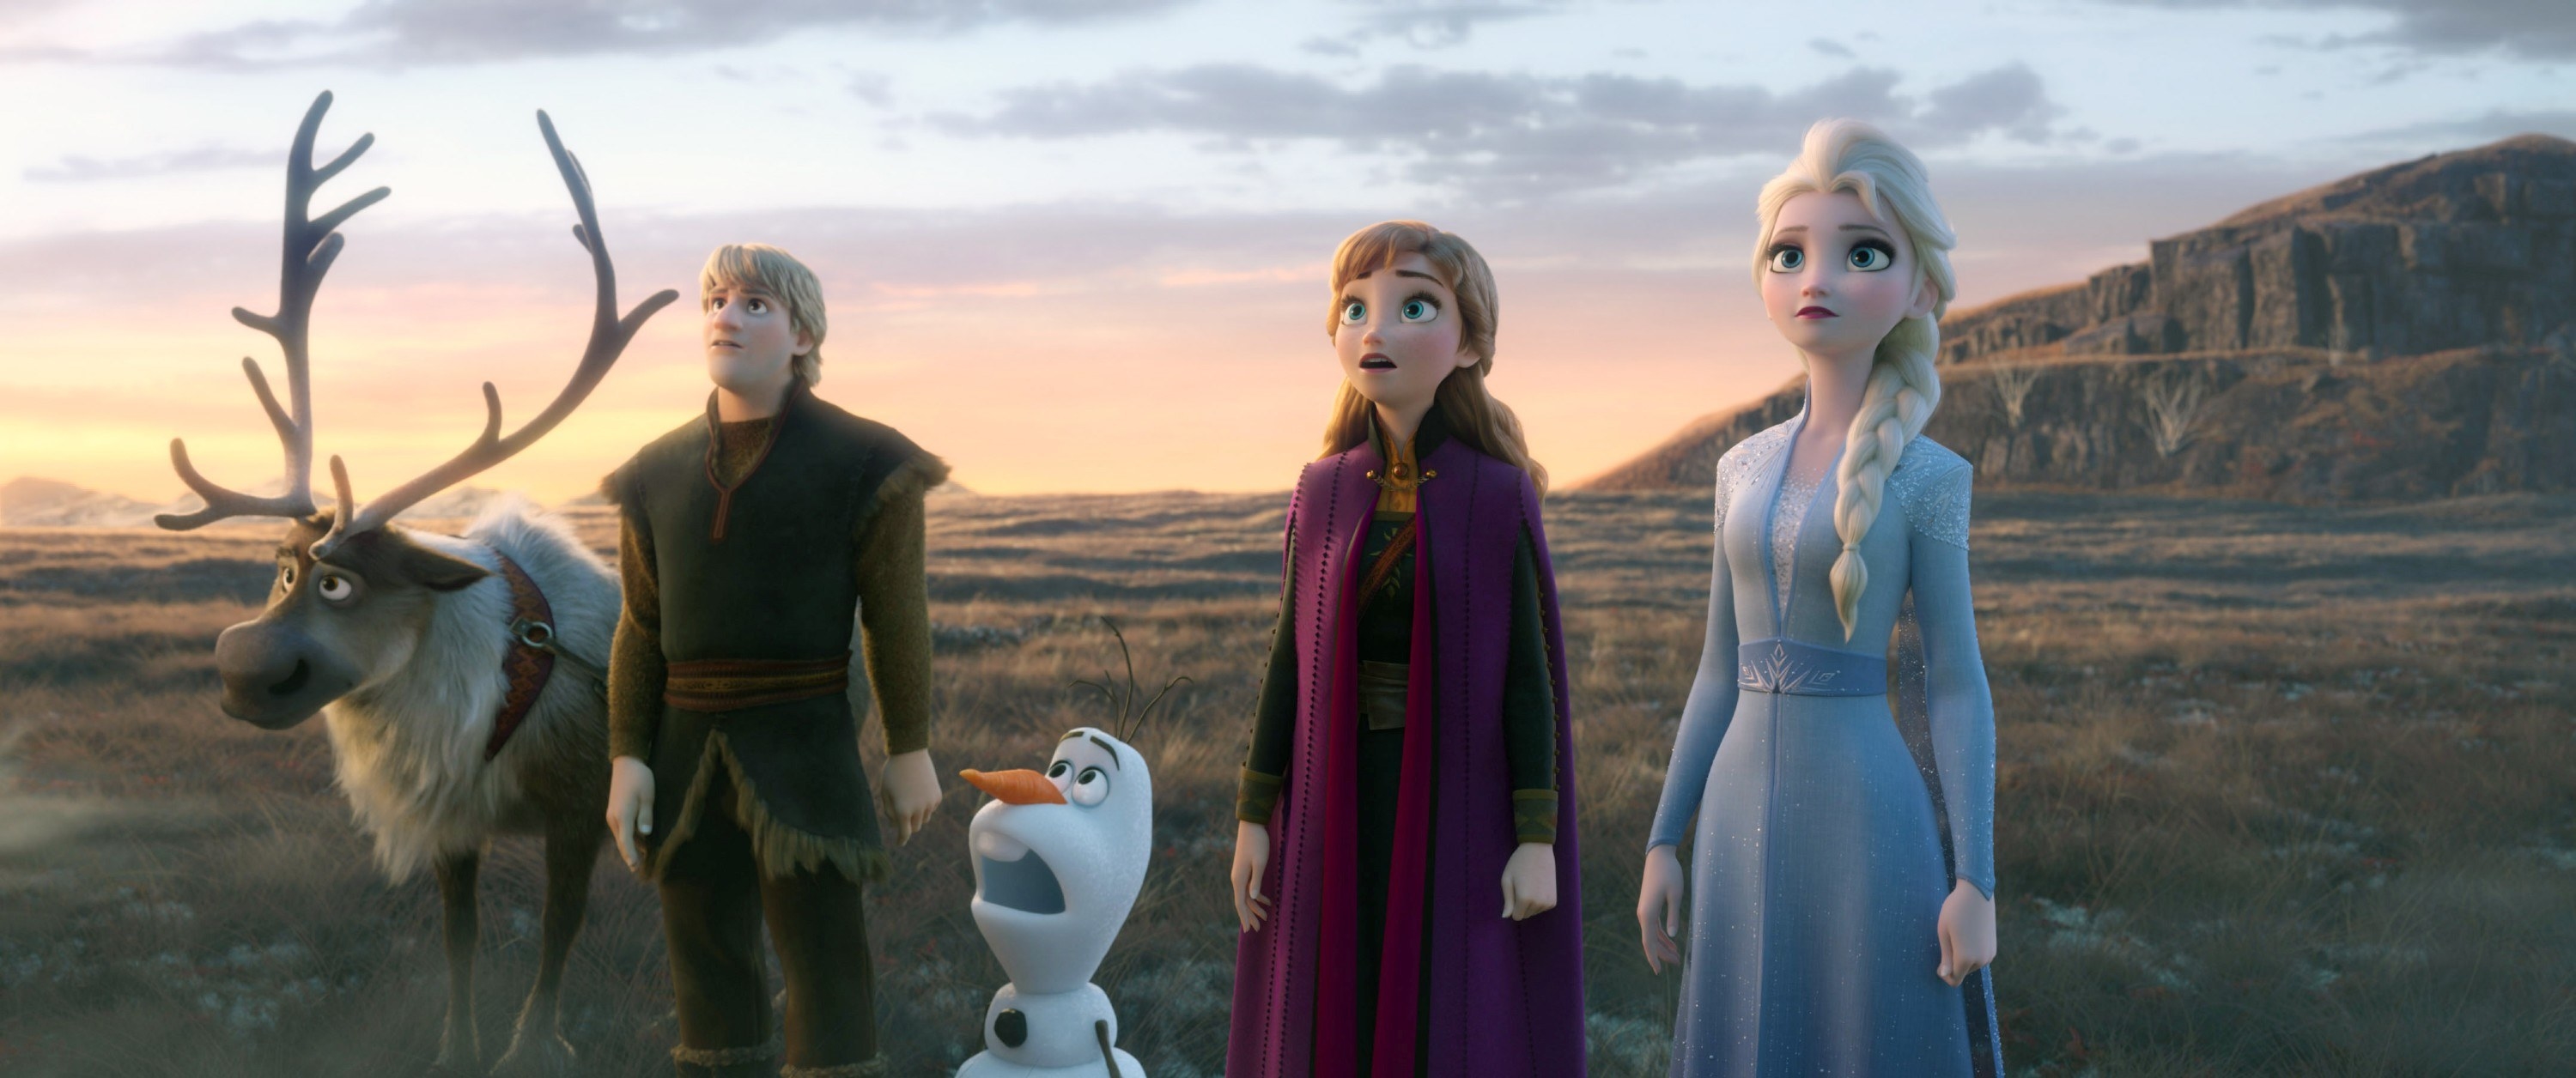 sven, kristoff, olaf, anna, and elsa looking up